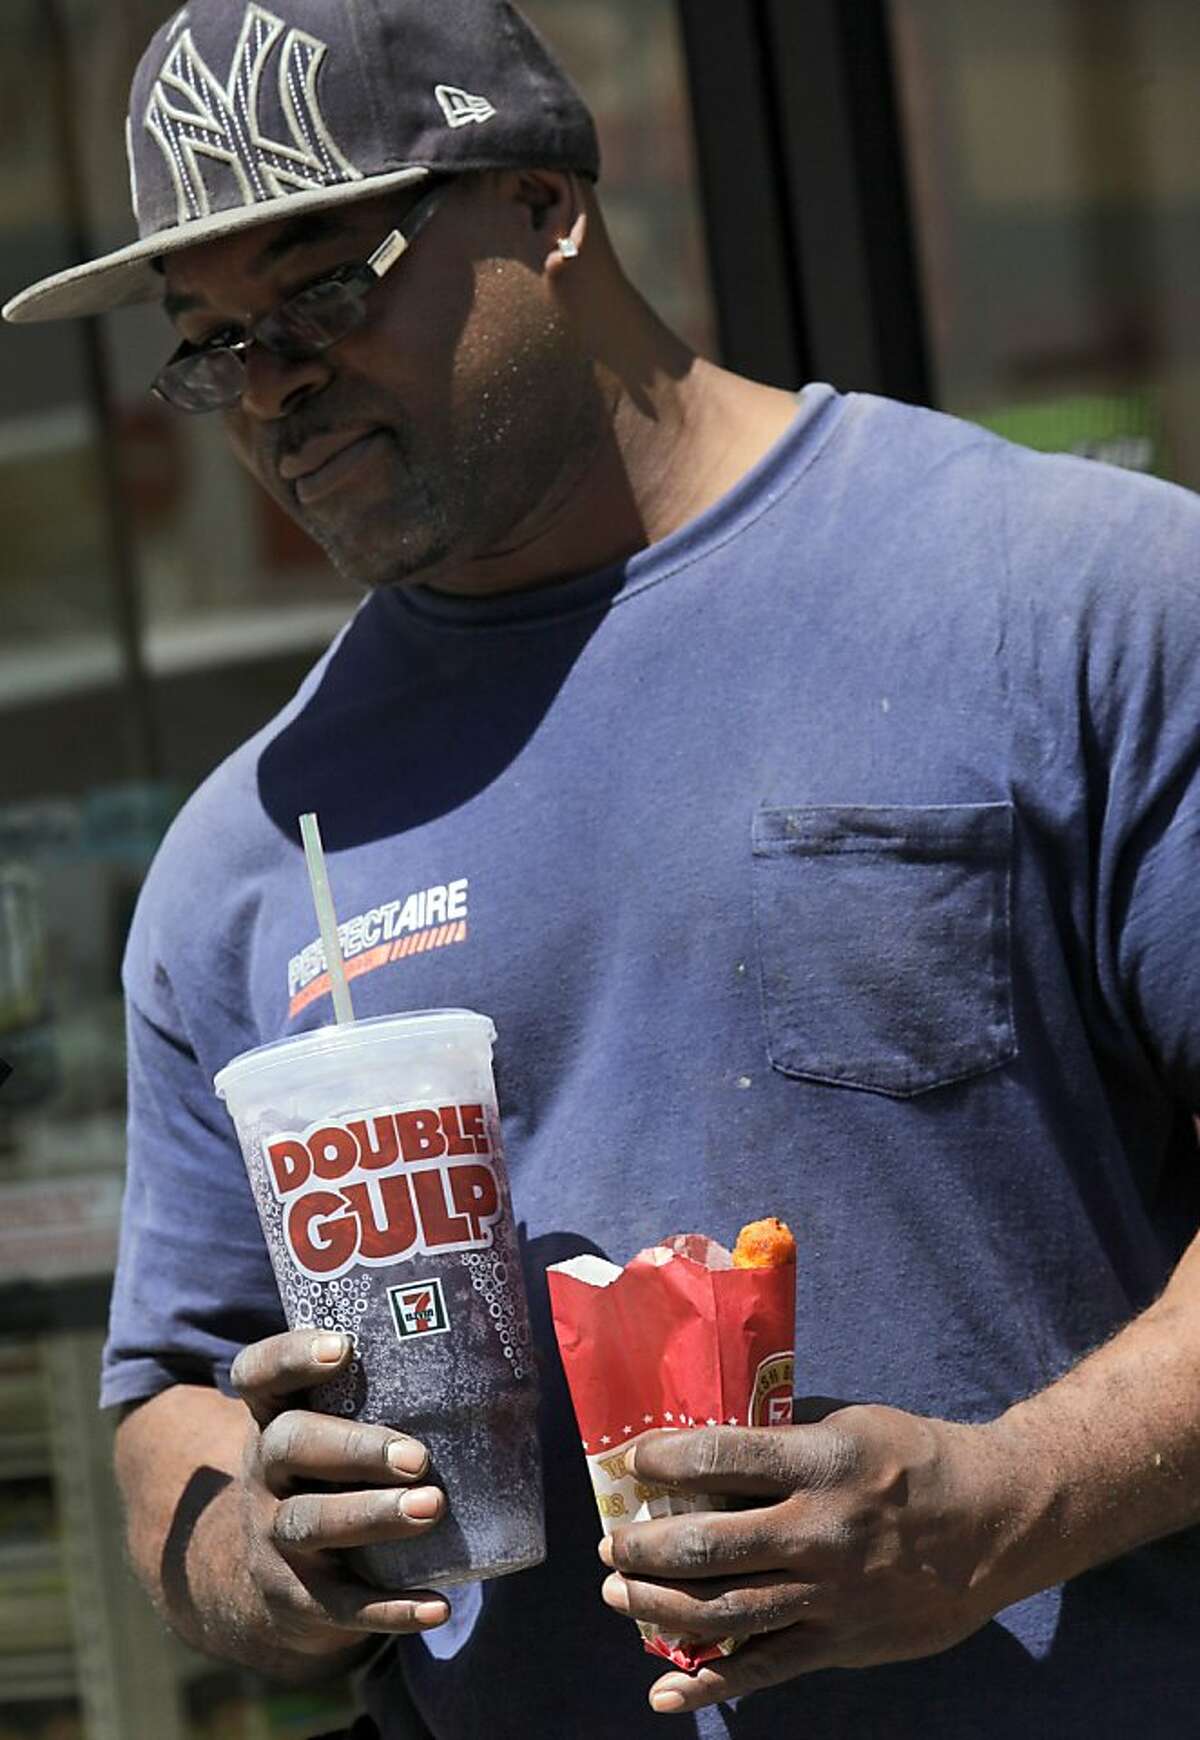 A man leaves a 7-Eleven store with a Double Gulp drink, in New York, Thursday, May 31, 2012. New York Mayor Michael Bloomberg is proposing a ban on the sale of large sodas and other sugary drinks in the city's restaurants, delis and movie theaters in the hopes of combating obesity, an expansion of his administration's efforts to encourage healthy behavior by limiting residents' choices. (AP Photo/Richard Drew)